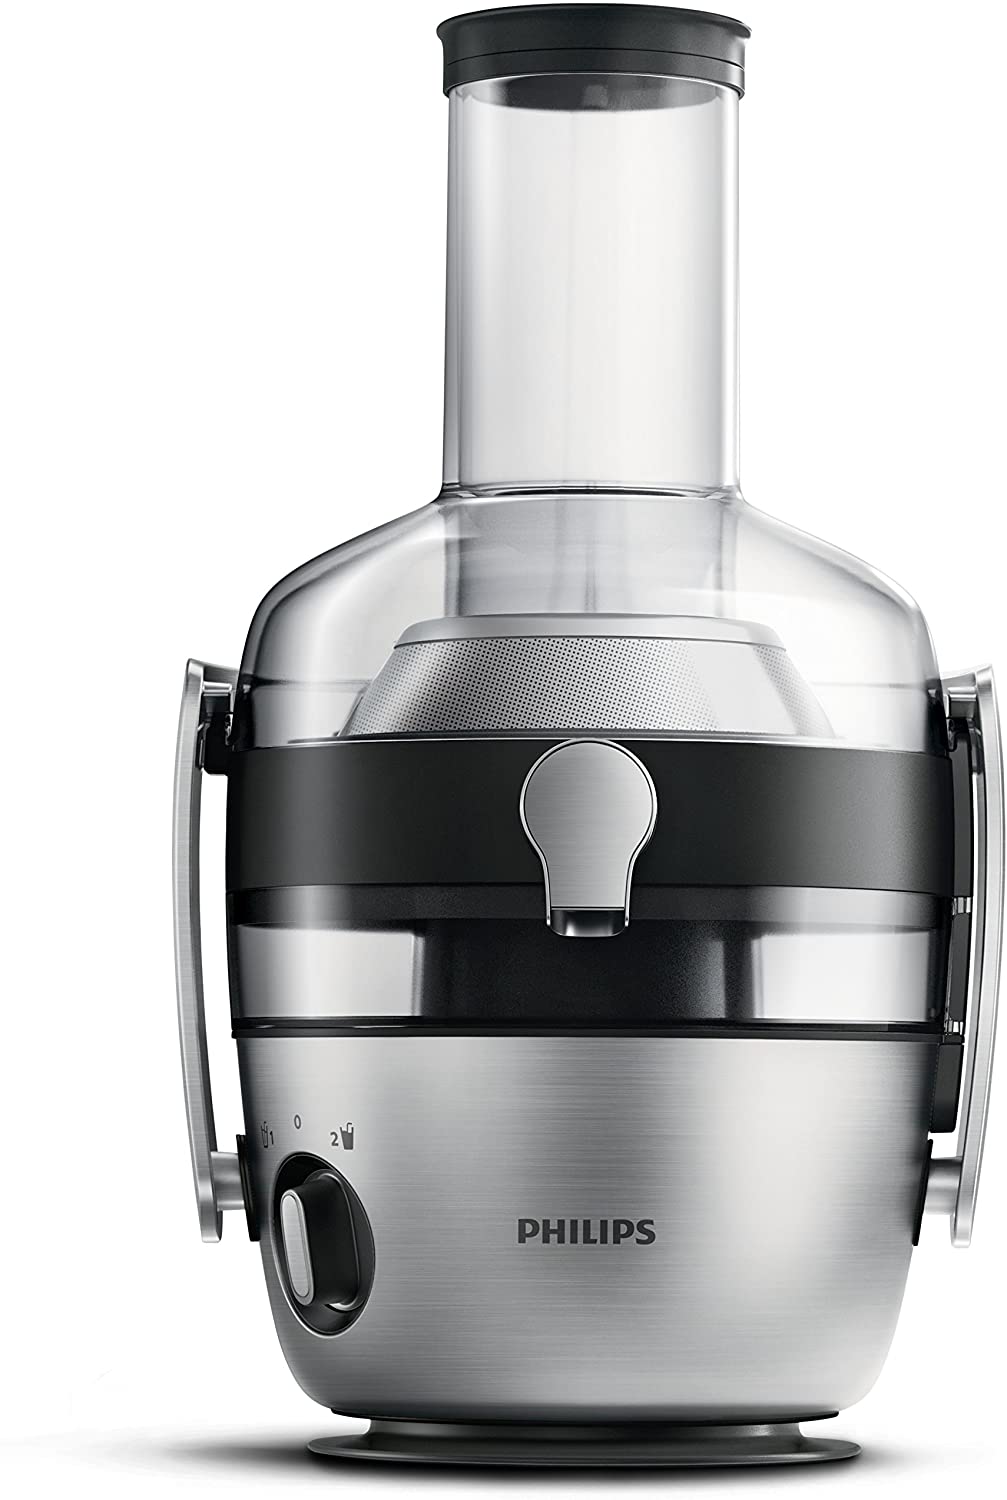 Philips Domestic Appliances Philips HR1921/20 Juicer, FibreBoost QuickClean Technology, Pre-rinse Function, 1100 W, Stainless Steel, 1100 W